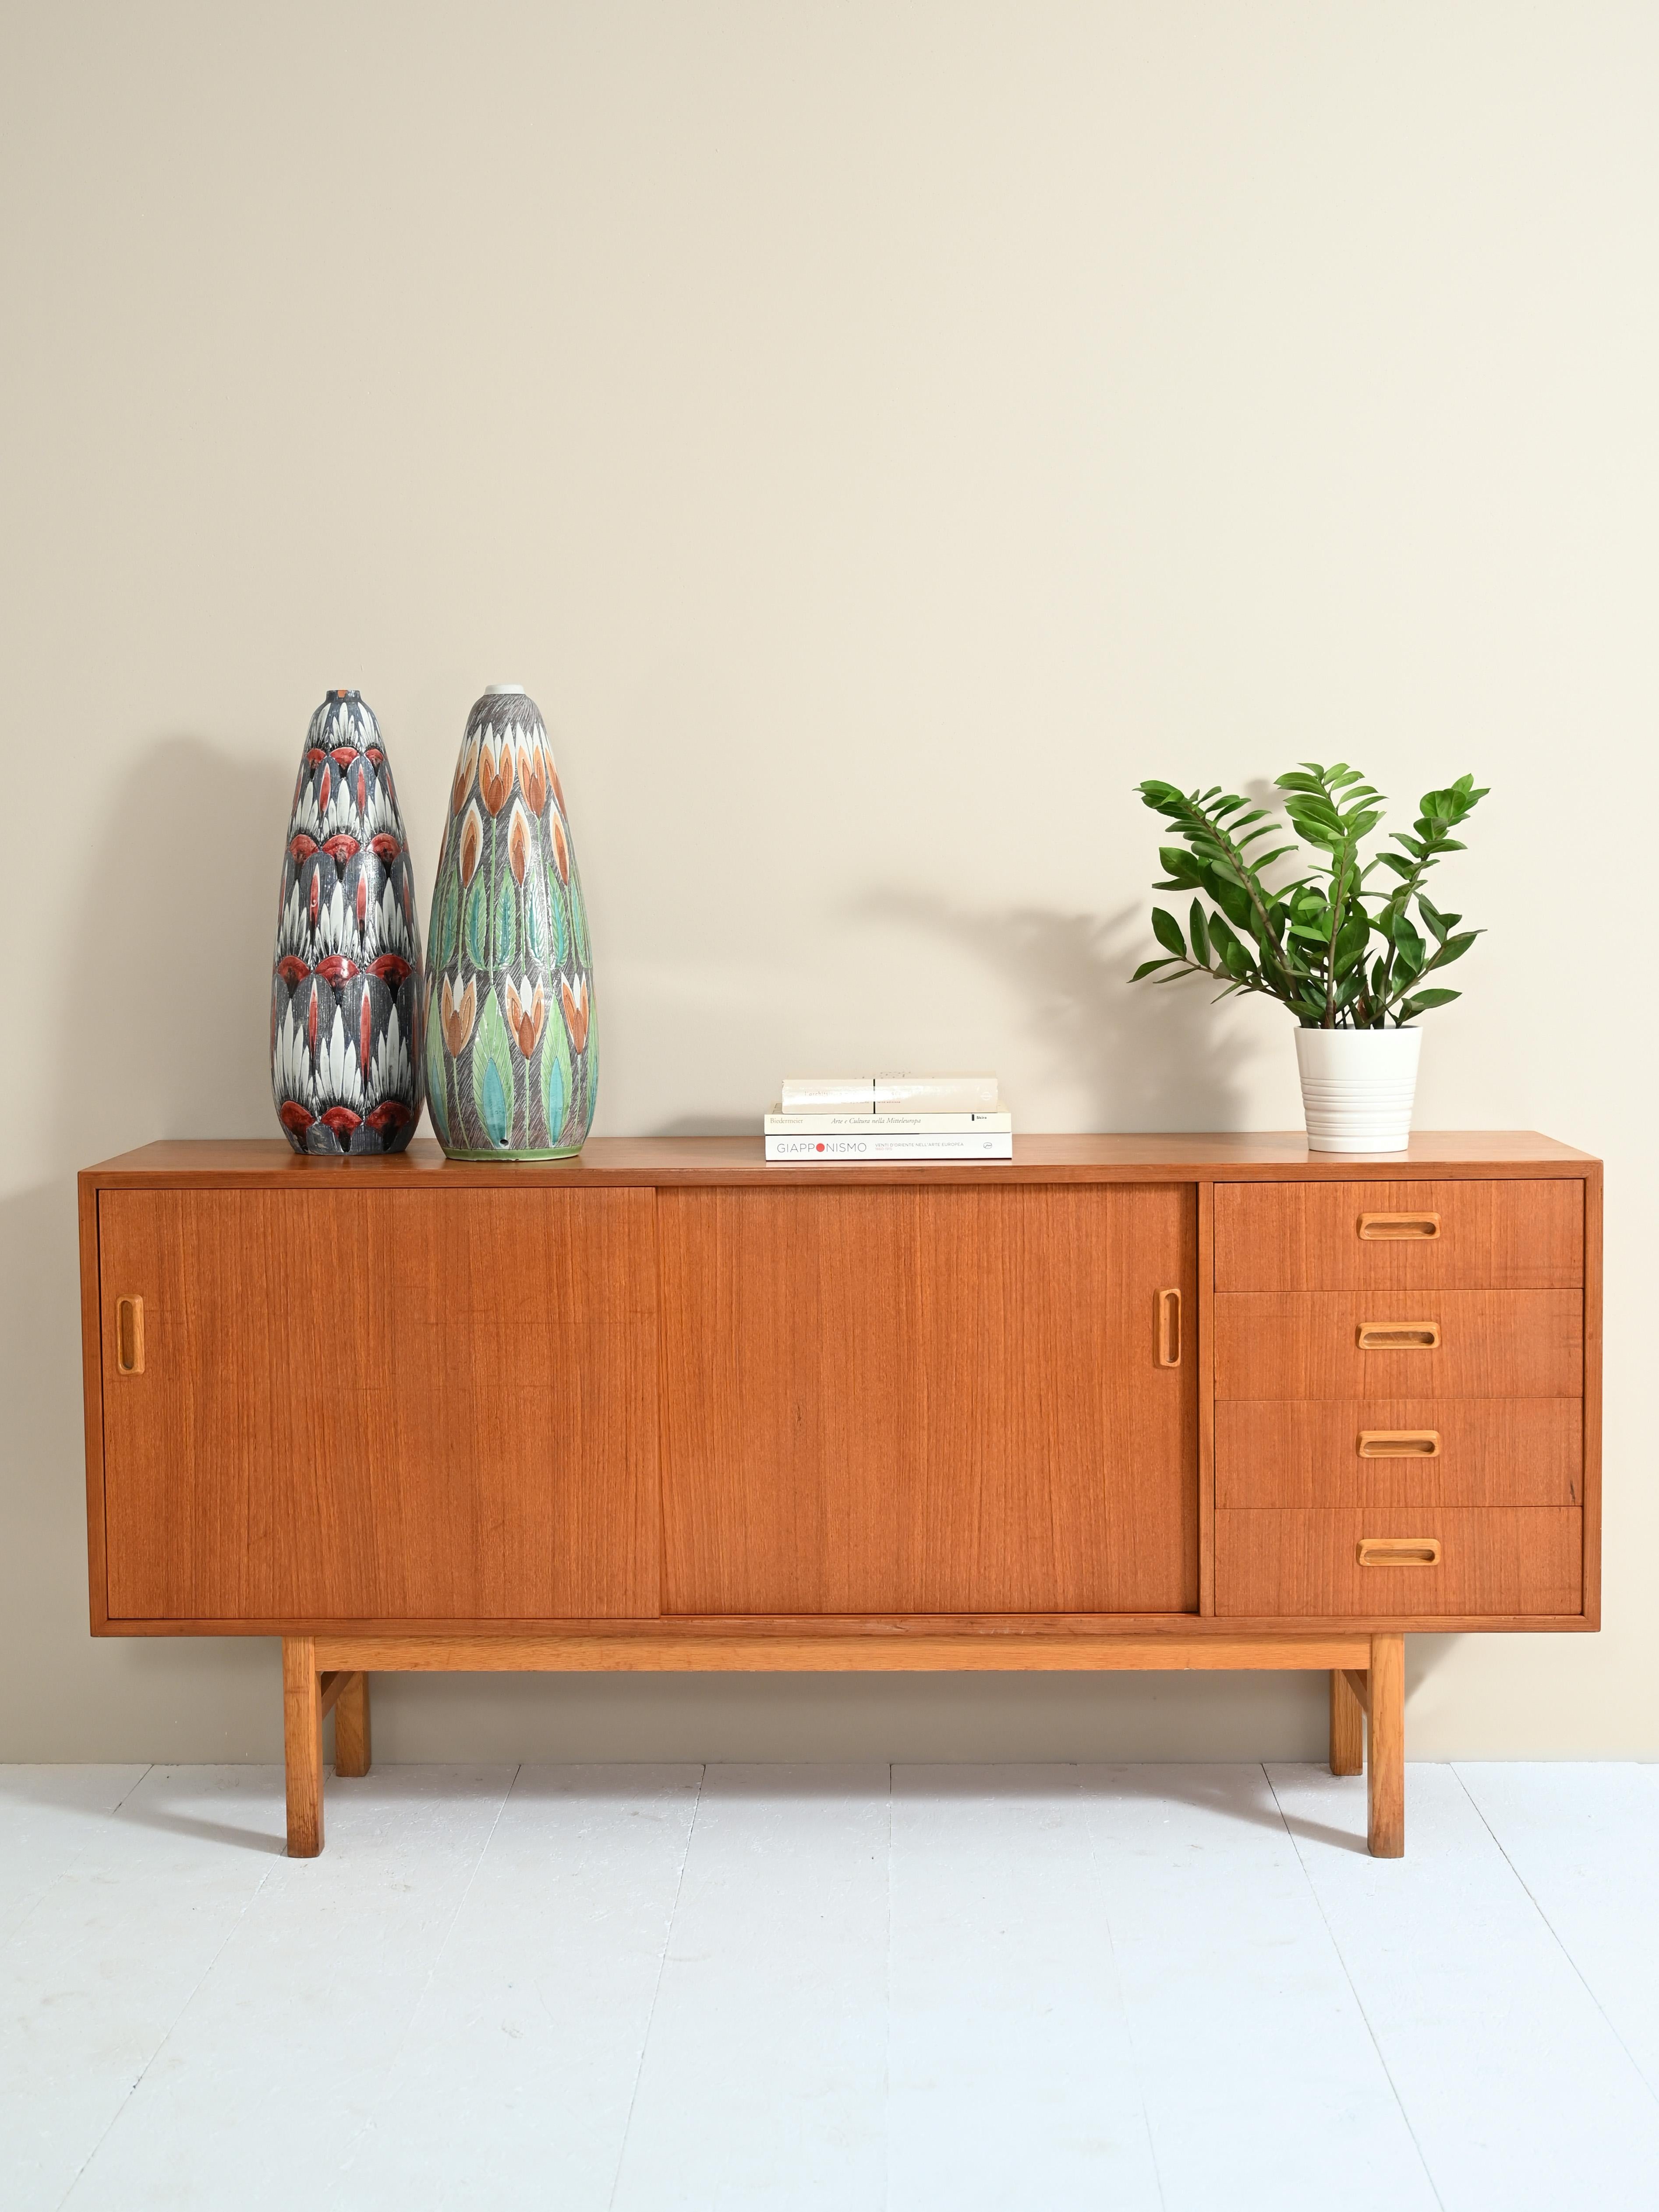 Original sideboard cabinet from the 1950s with sliding doors and drawers.

The classic and typical lines of the period are enriched with fine details such as the special carved wooden handles. Inside the compartment there is a shelf, while on the